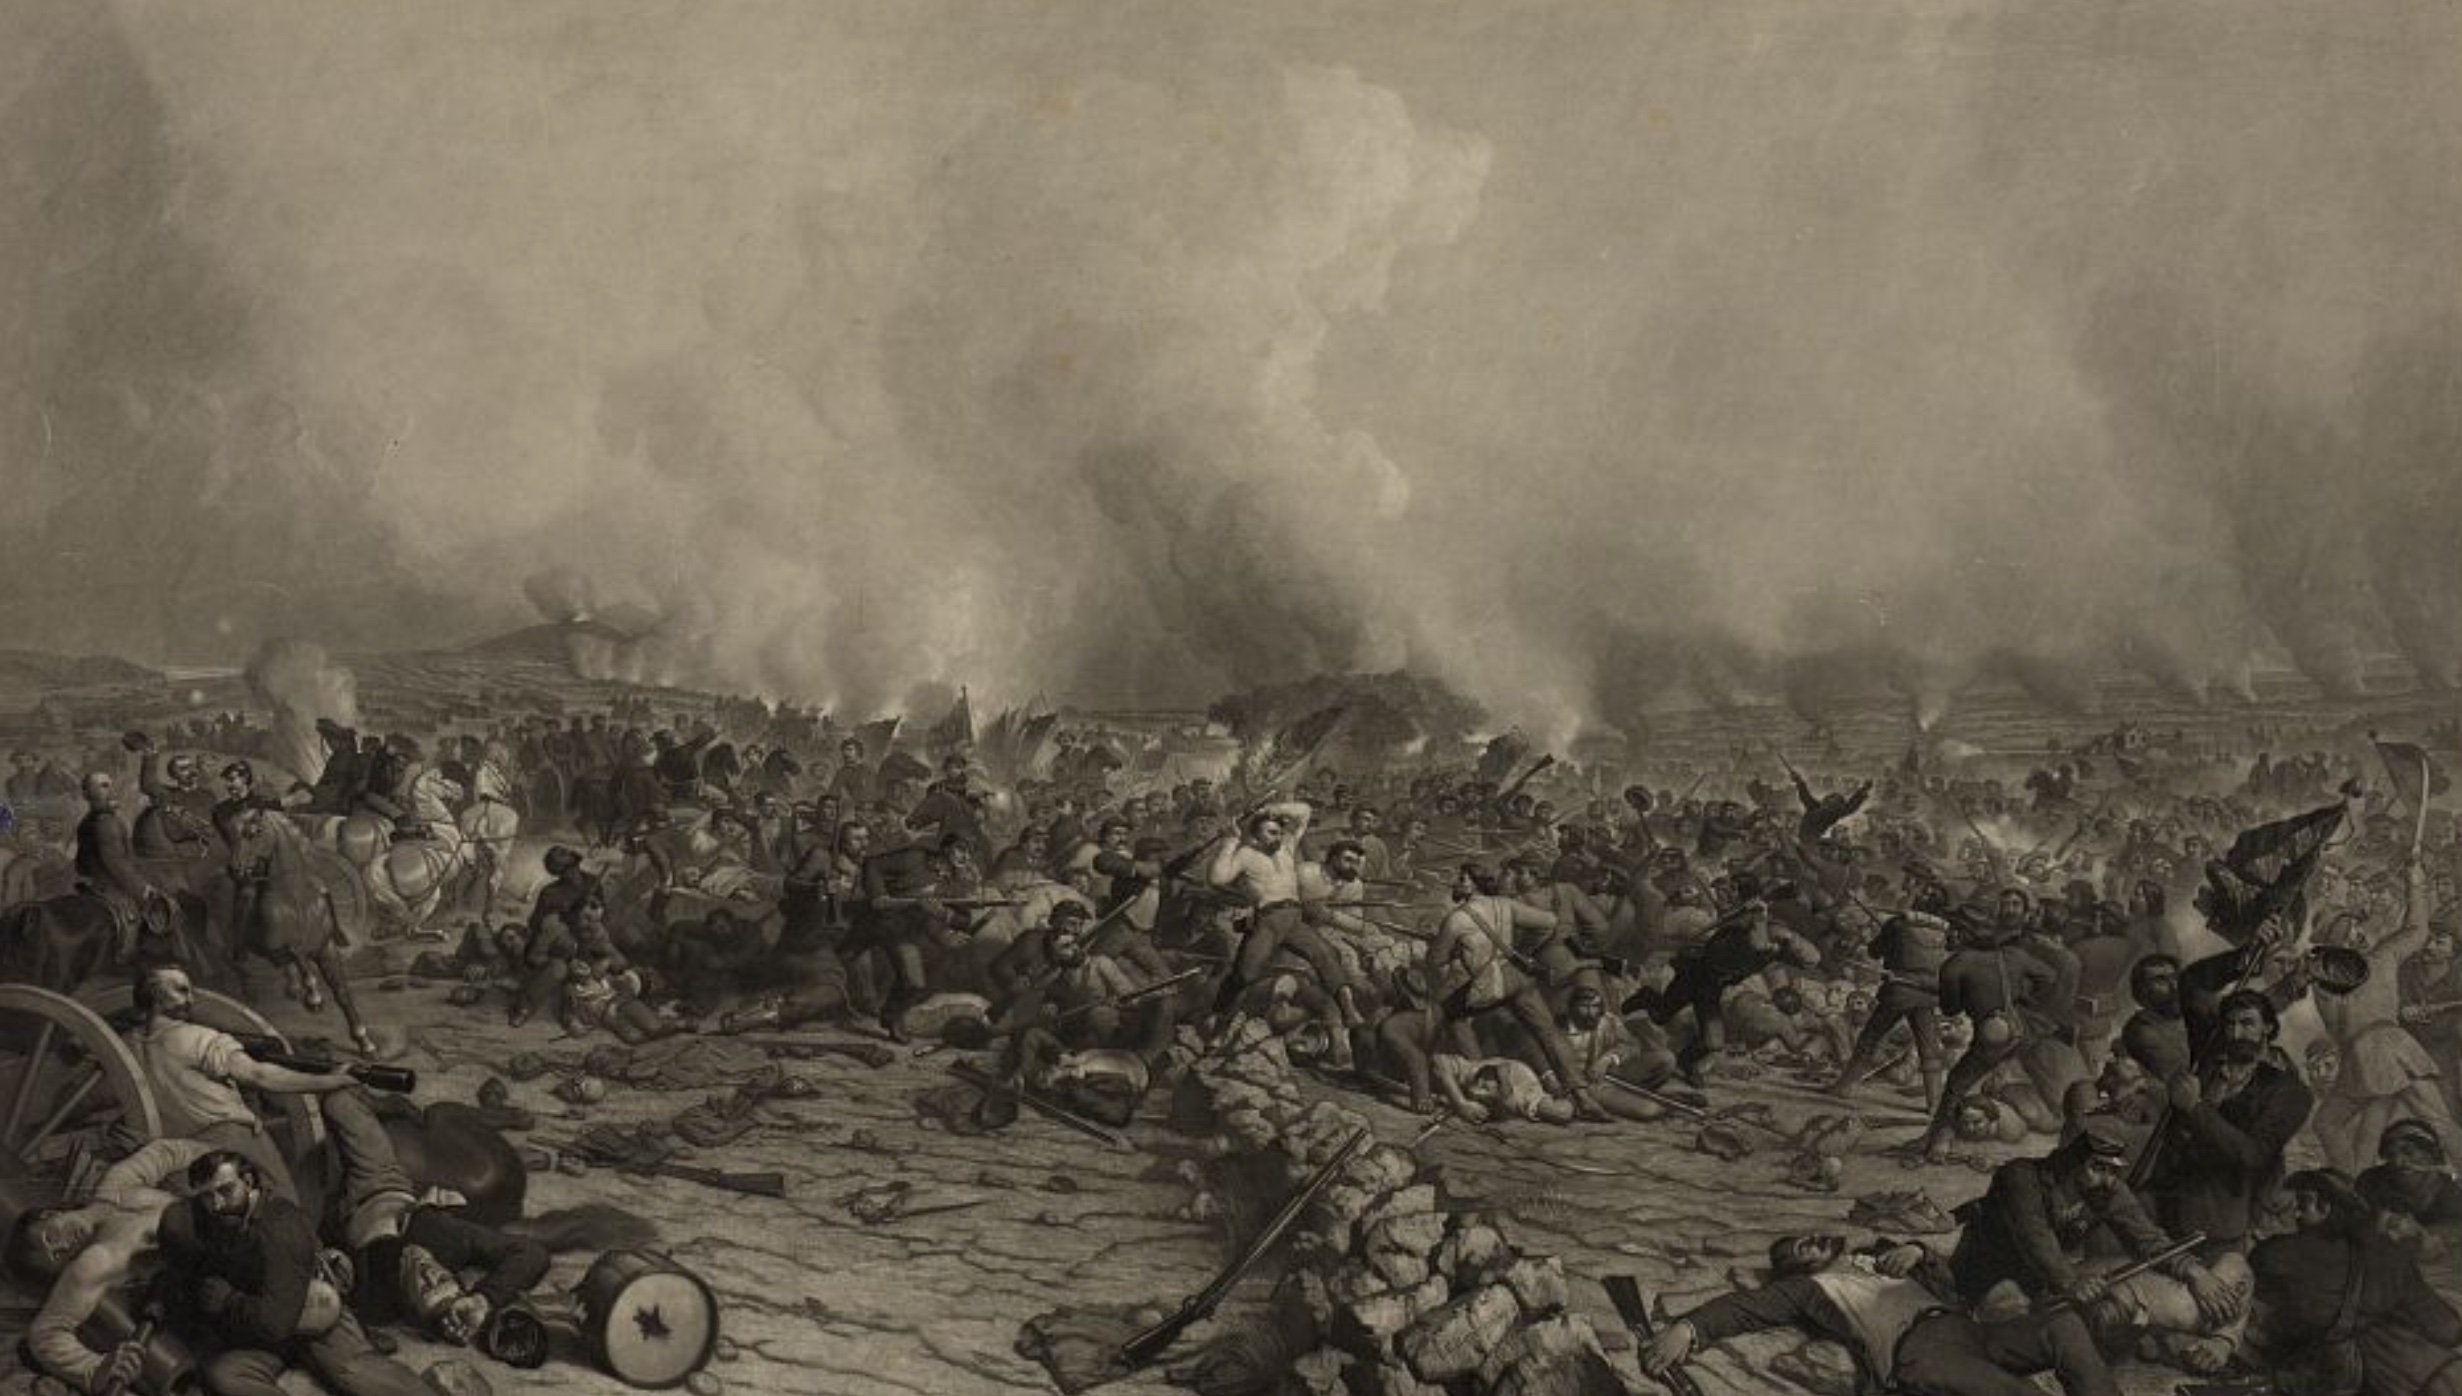 The Battle of Gettysburg by Peter Rothermel